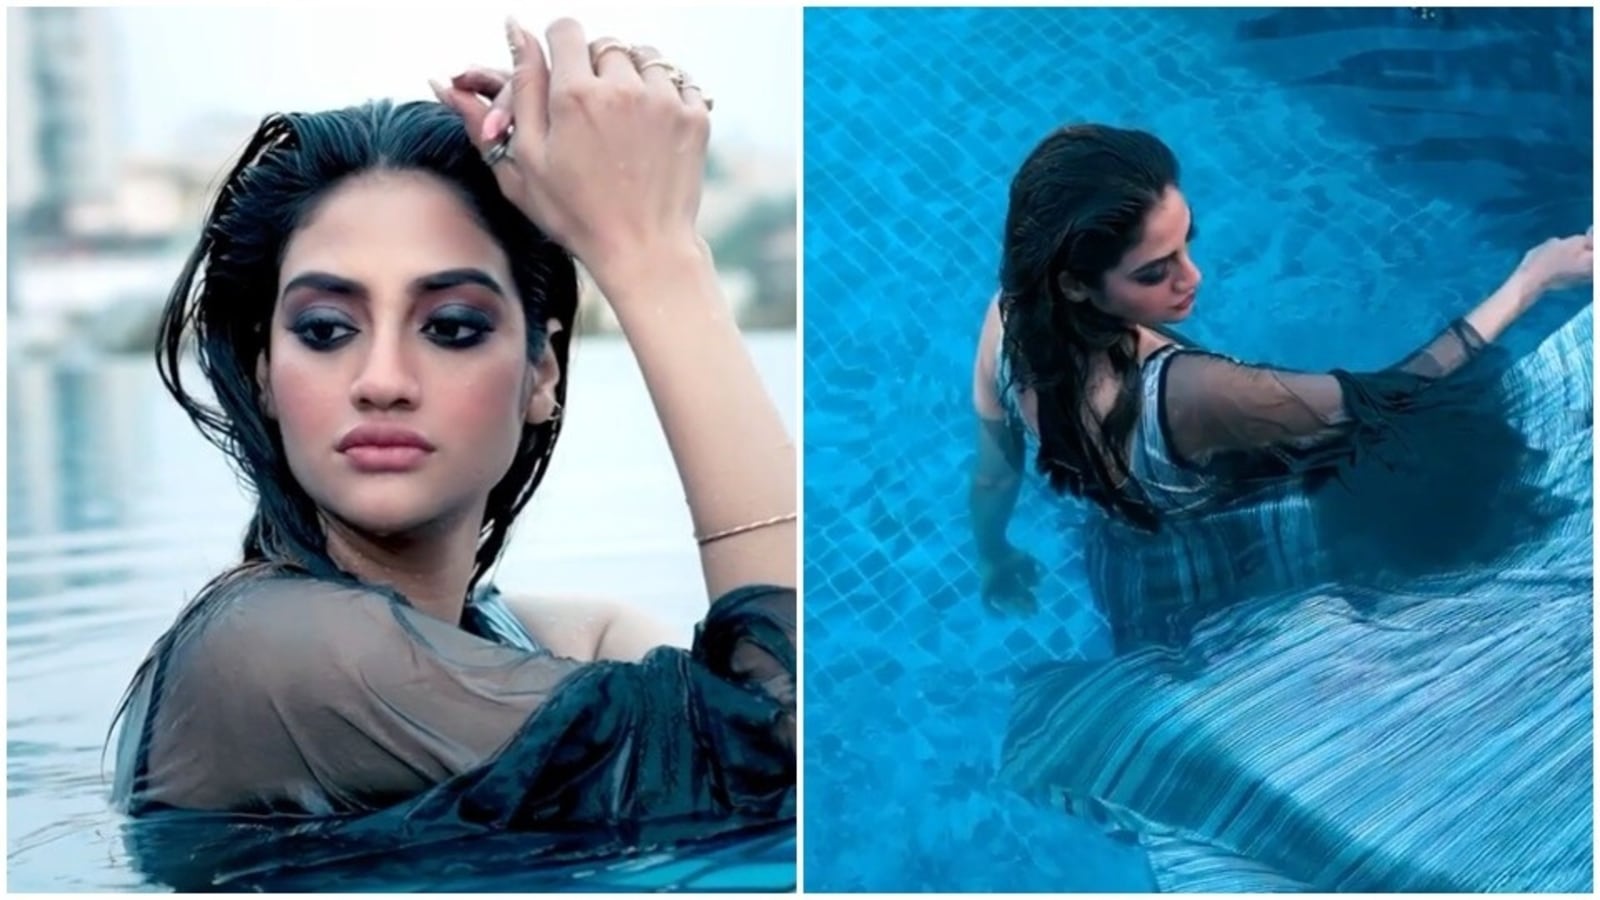 Nusrat Jahan Fucking - Pregnant Nusrat Jahan takes a dip in pool for photoshoot, promotes  contraceptive pills on Instagram - Hindustan Times